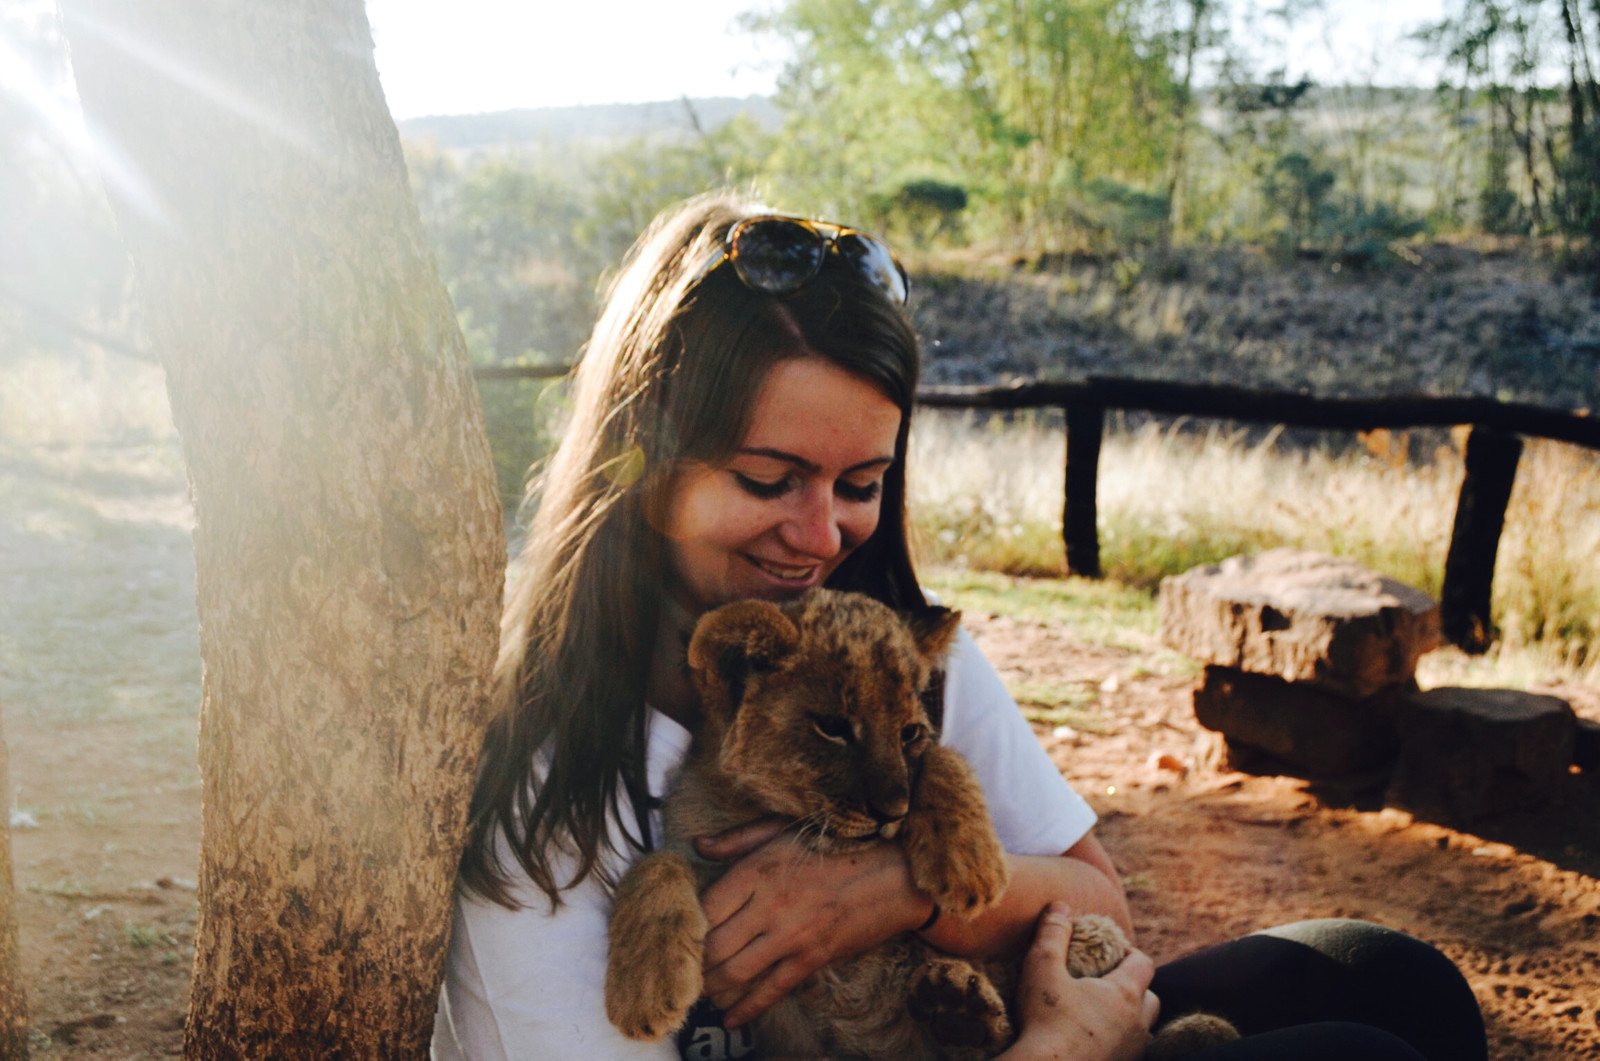  Undergraduate student Helena Gallagher with a lion cub in South Africa.